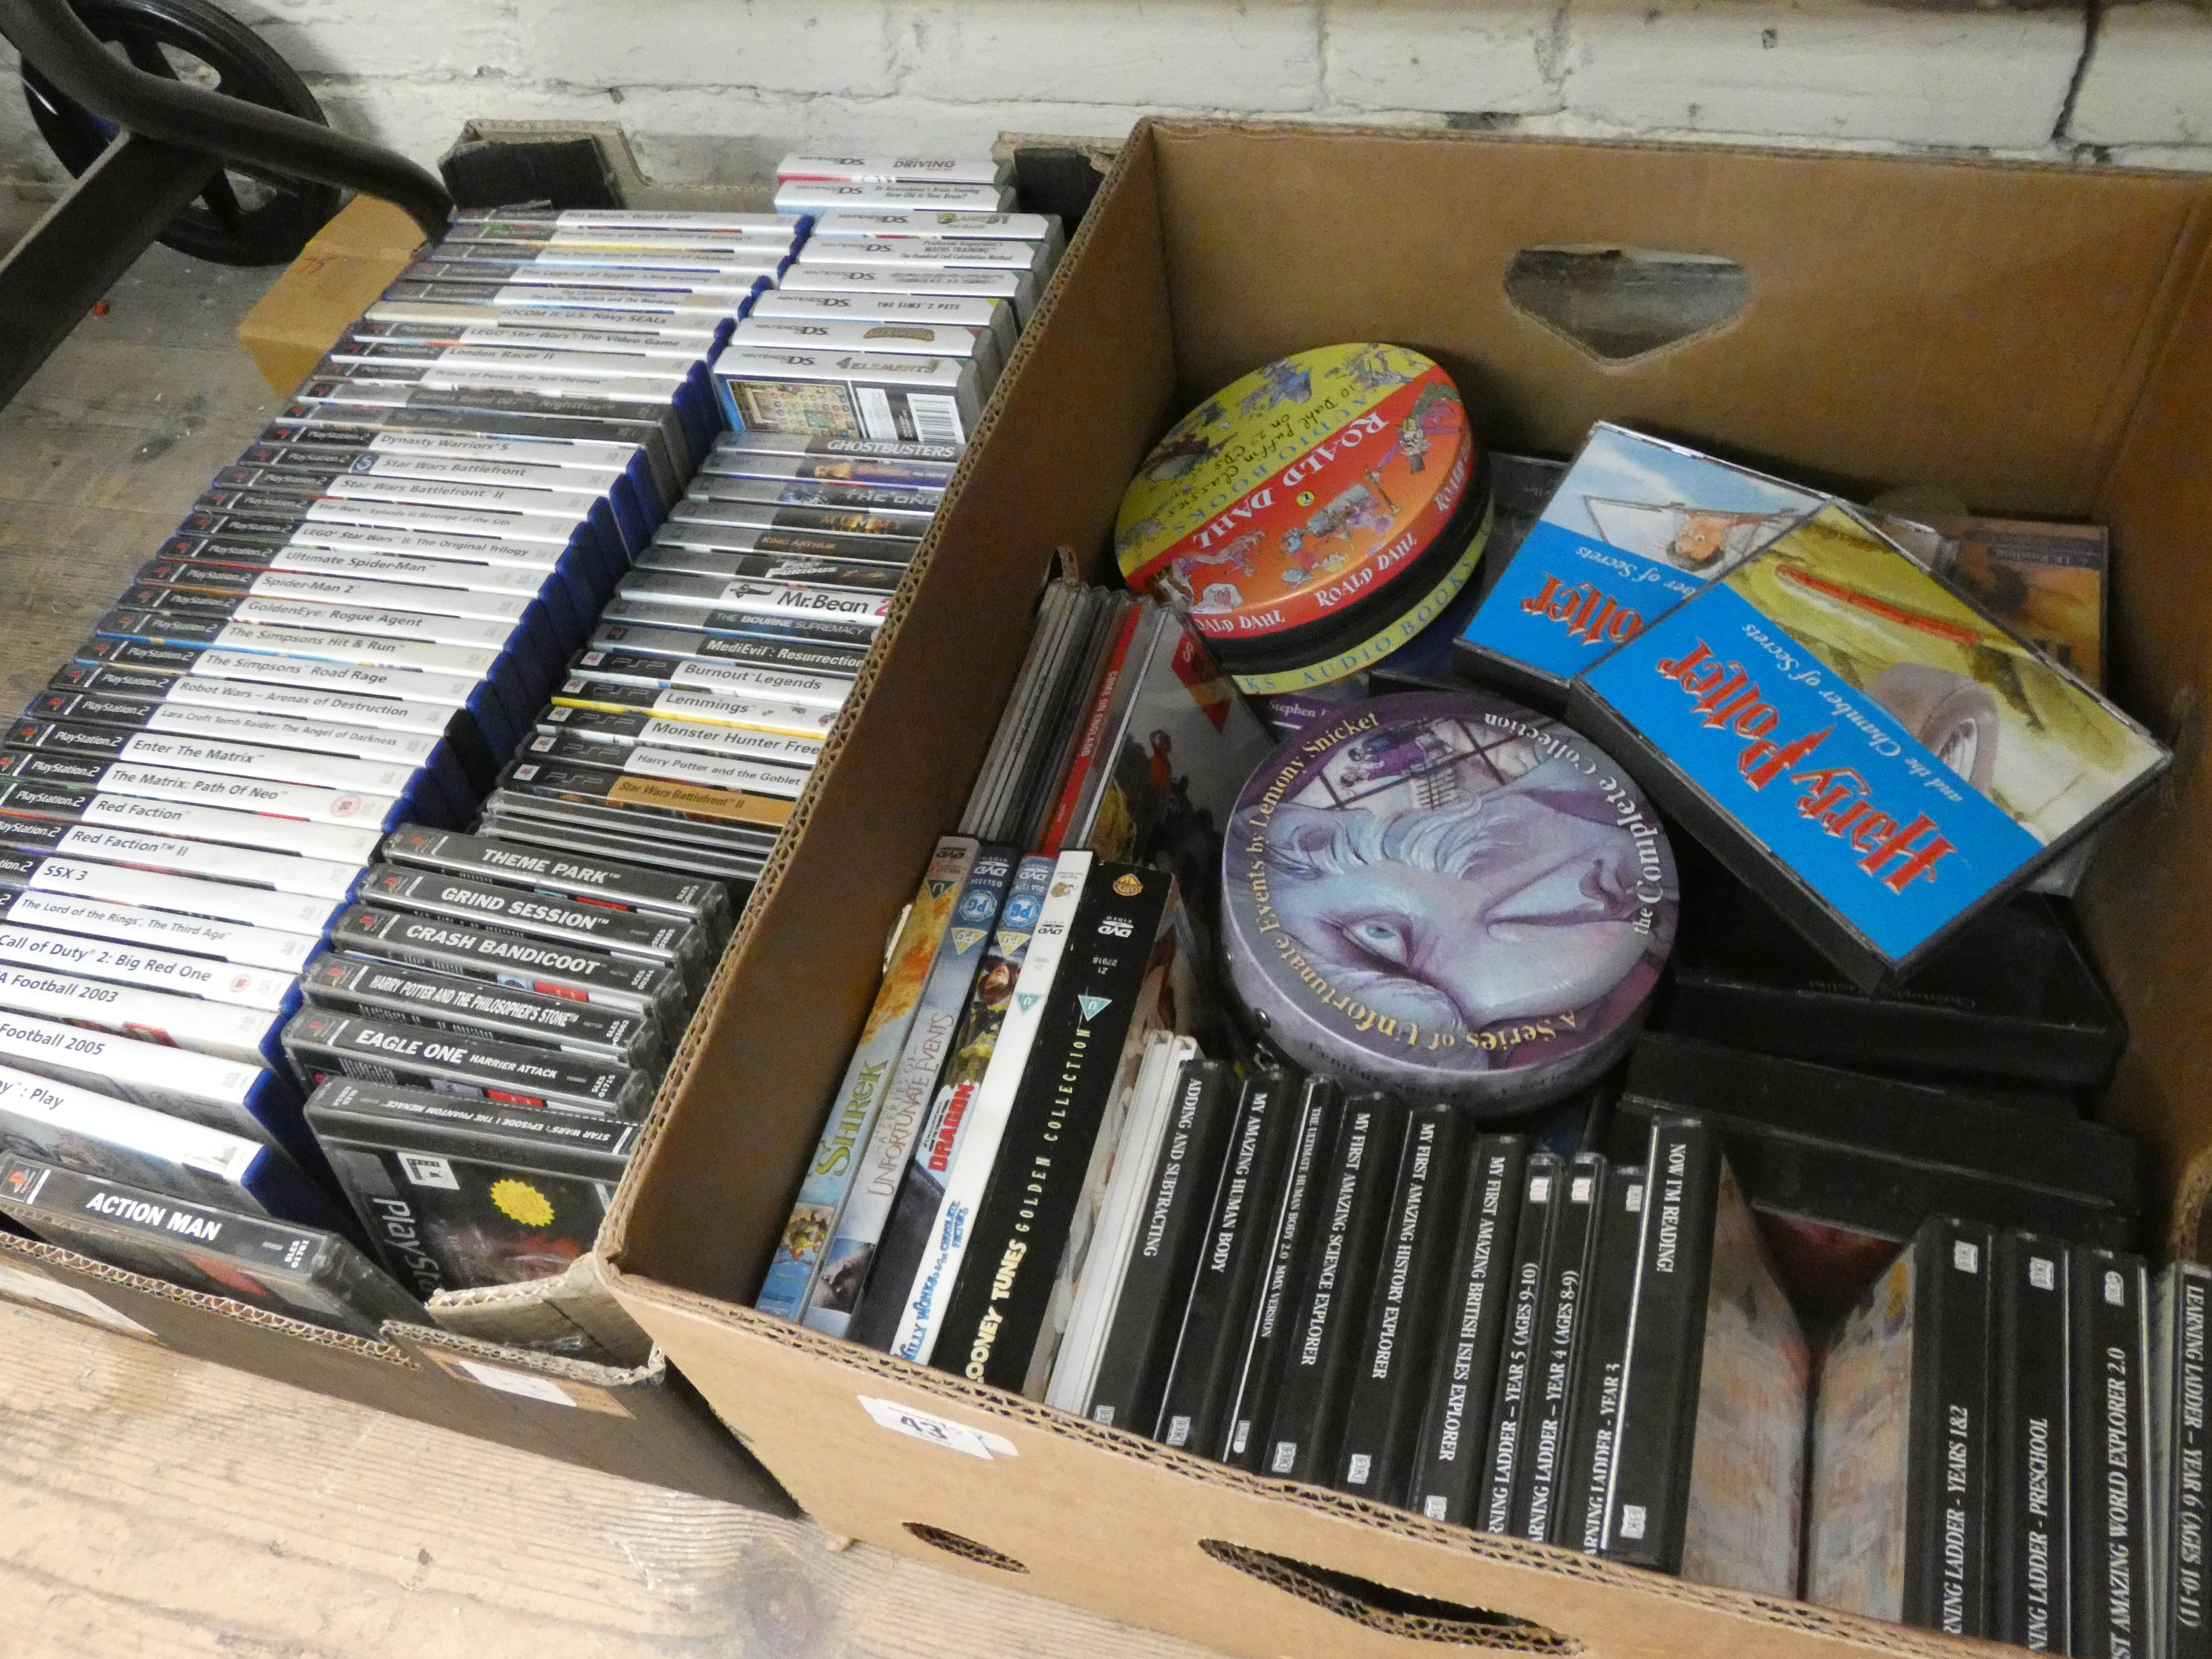 Two large boxes of Playstation 2 games, PSP games, Now I am Reading educational games,